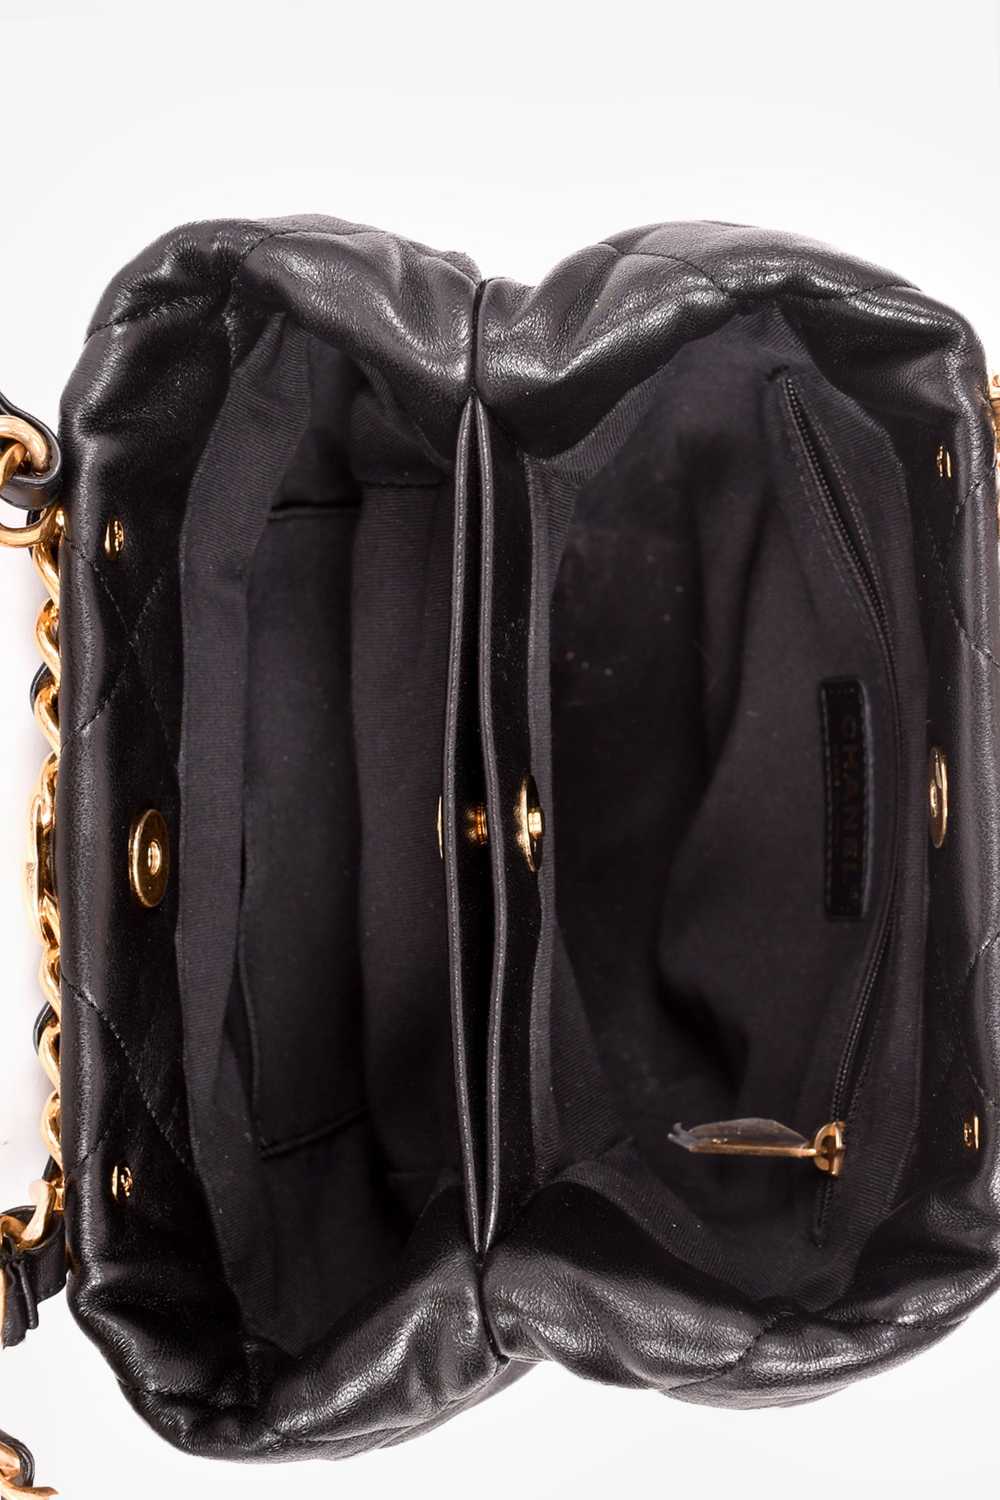 Pre-loved Chanel™ Black Lambskin Quilted Small Sh… - image 12